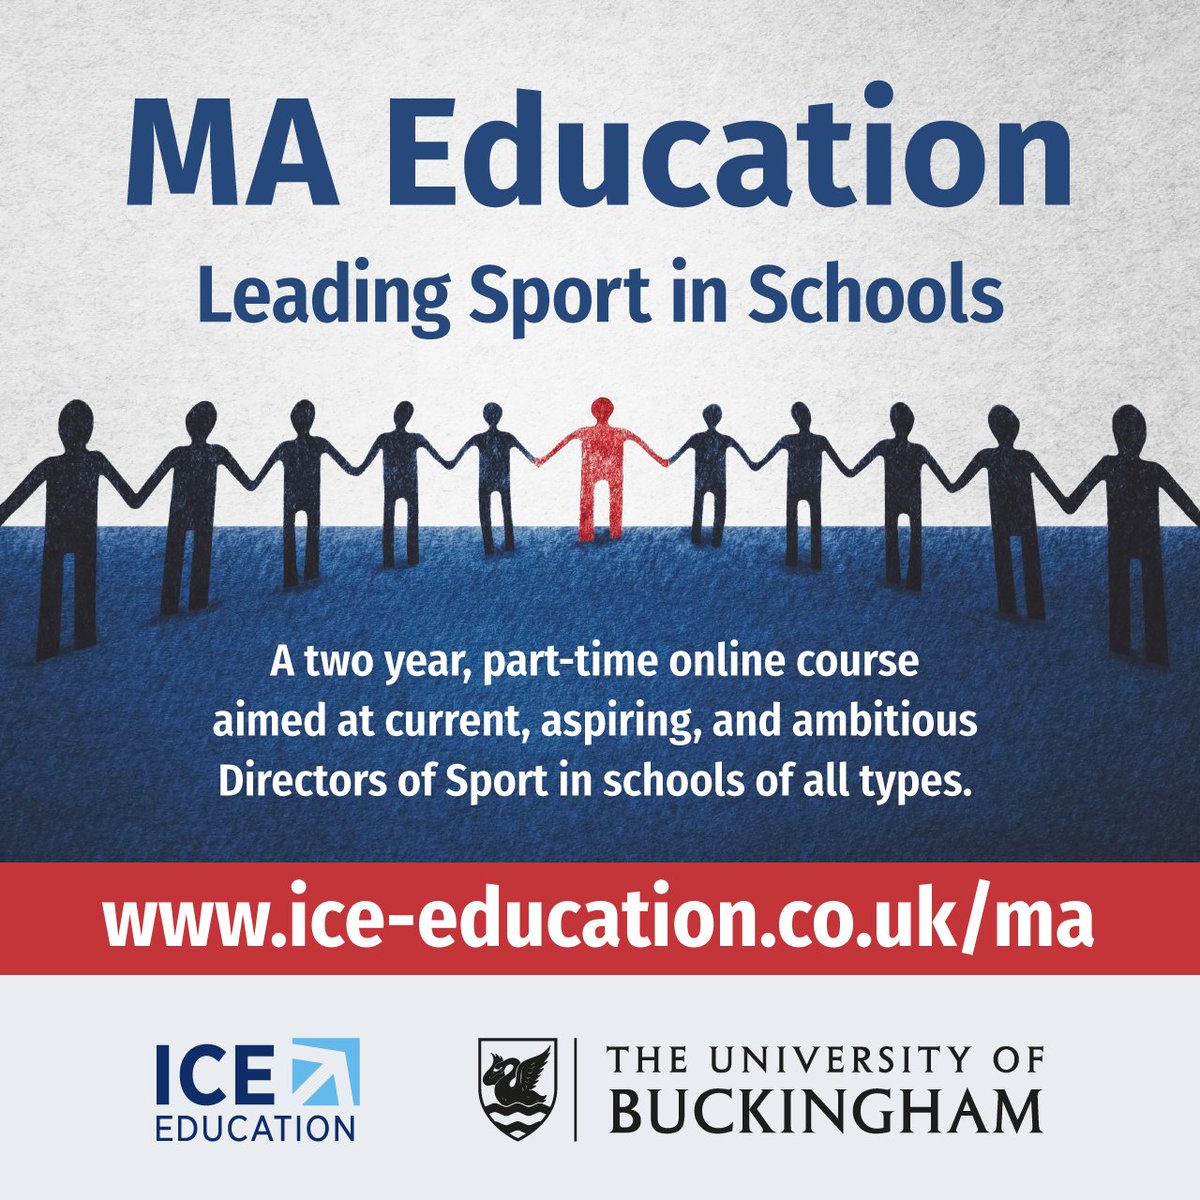 Applications are open now for our MA course in Leading School Sports in partnership with the University of Buckingham. The course is delivered 100% online making it ideal for those working overseas. Click here to find out more bit.ly/3S0ED1z